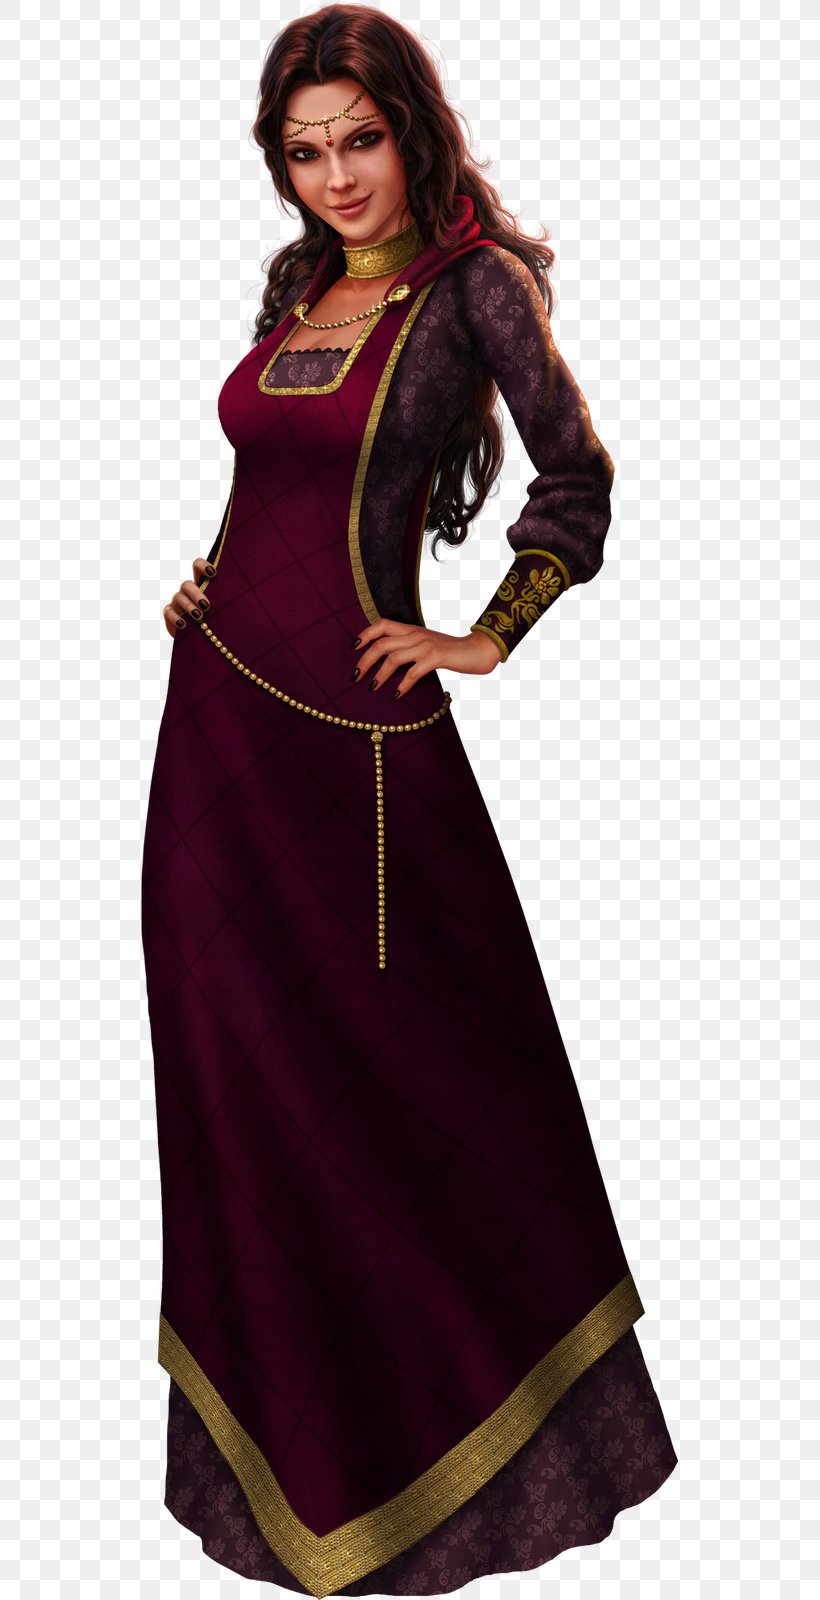 The Sims Medieval: Pirates And Nobles The Sims 3: Seasons Middle Ages Electronic Arts Game, PNG, 537x1600px, Sims Medieval Pirates And Nobles, Costume, Costume Design, Electronic Arts, Game Download Free